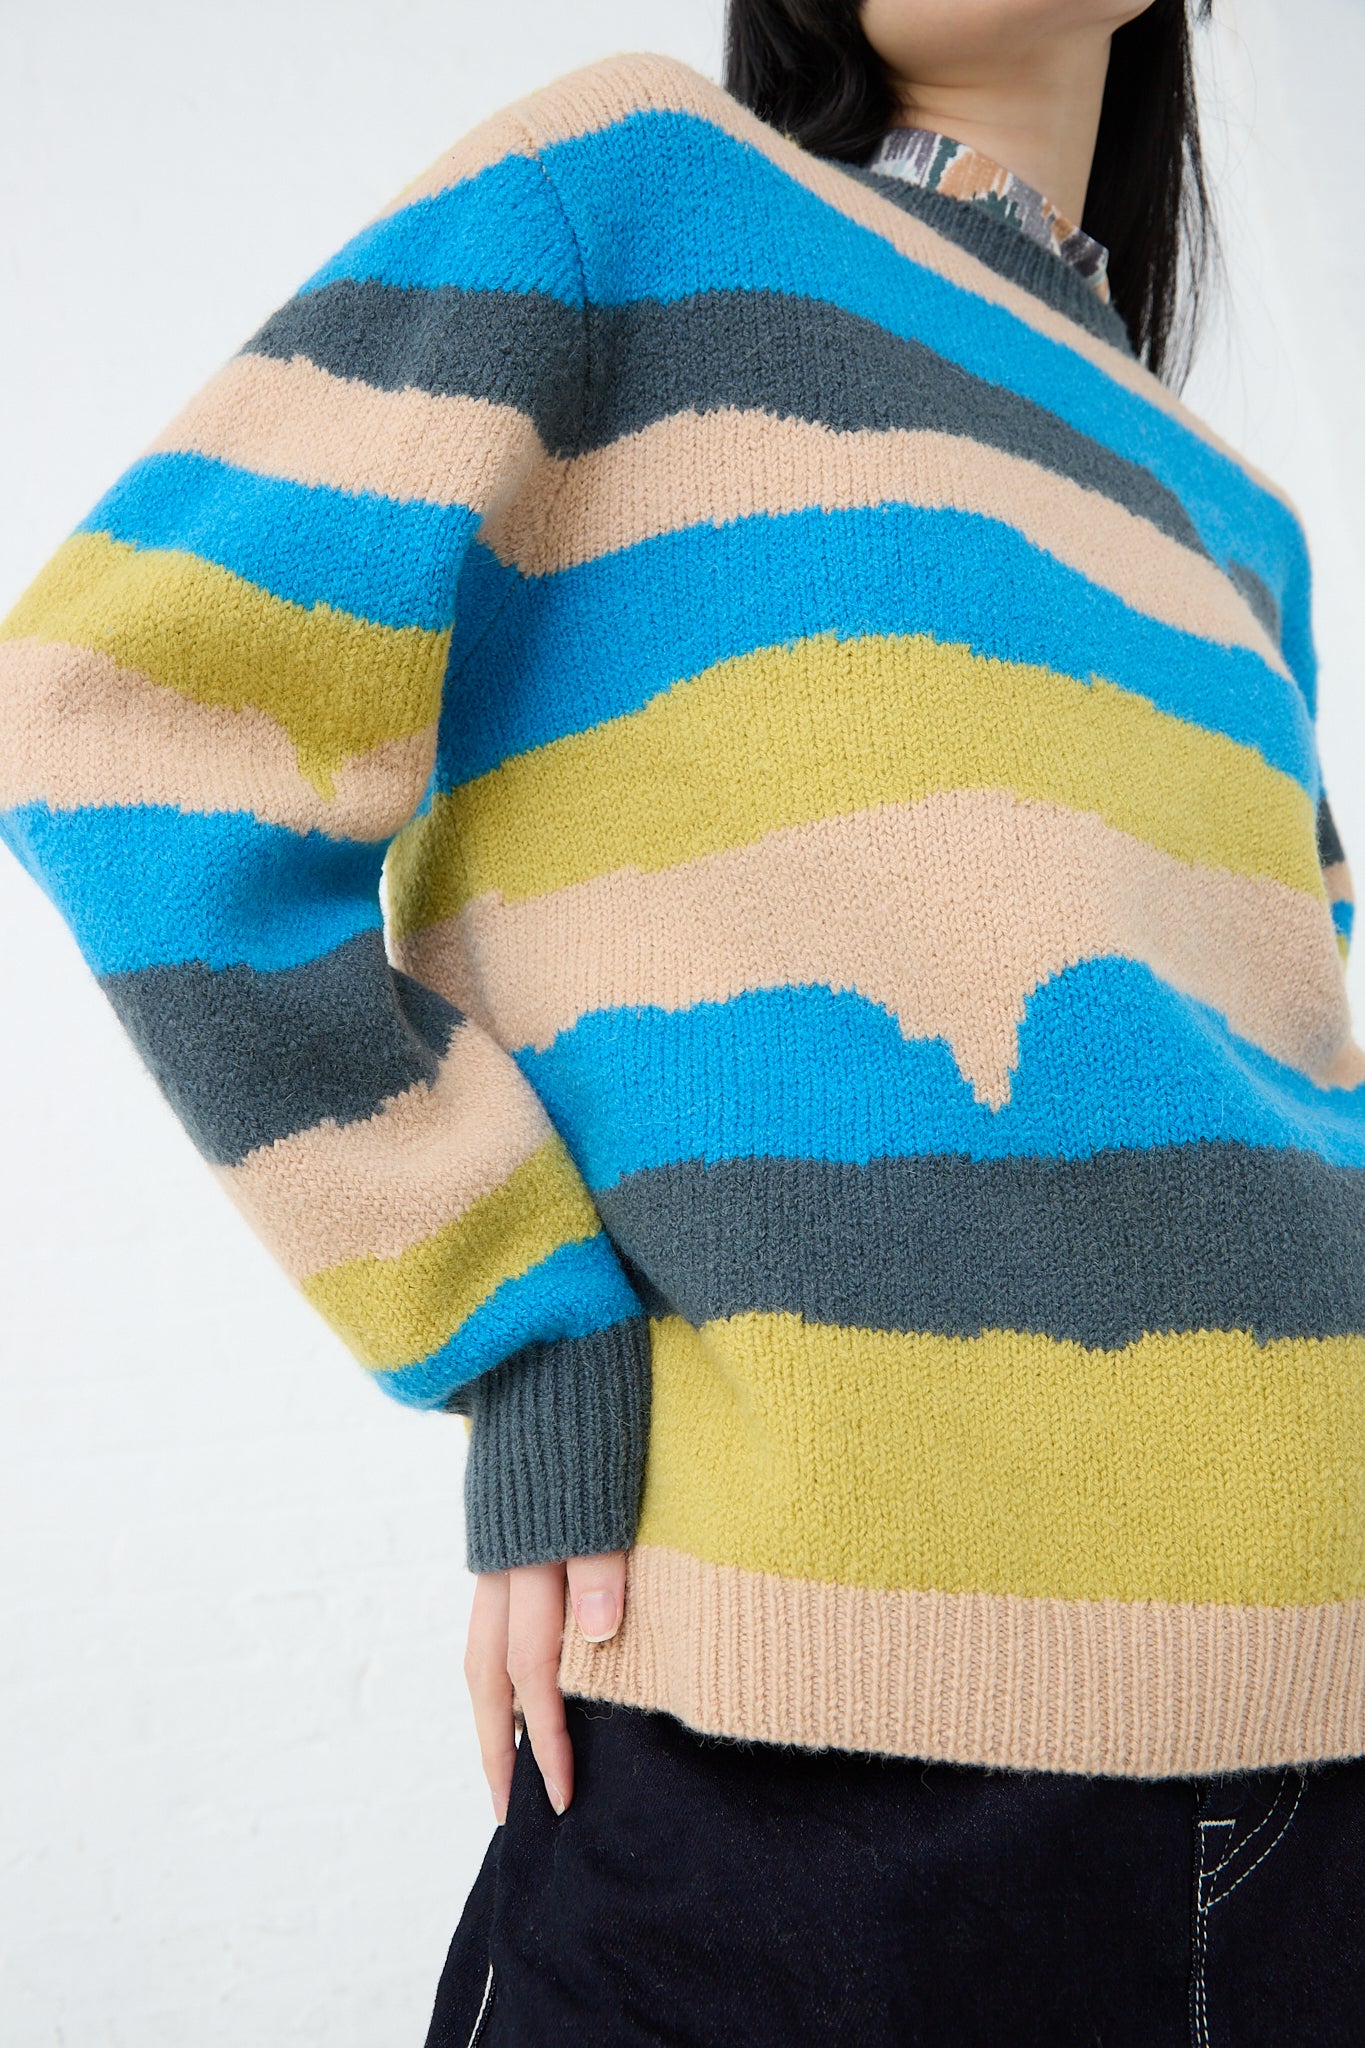 A woman wearing a vibrant striped Light Wind Sweater in Blue Mix, made with alpaca/wool blend by Mina Perhonen. Front view and up close.